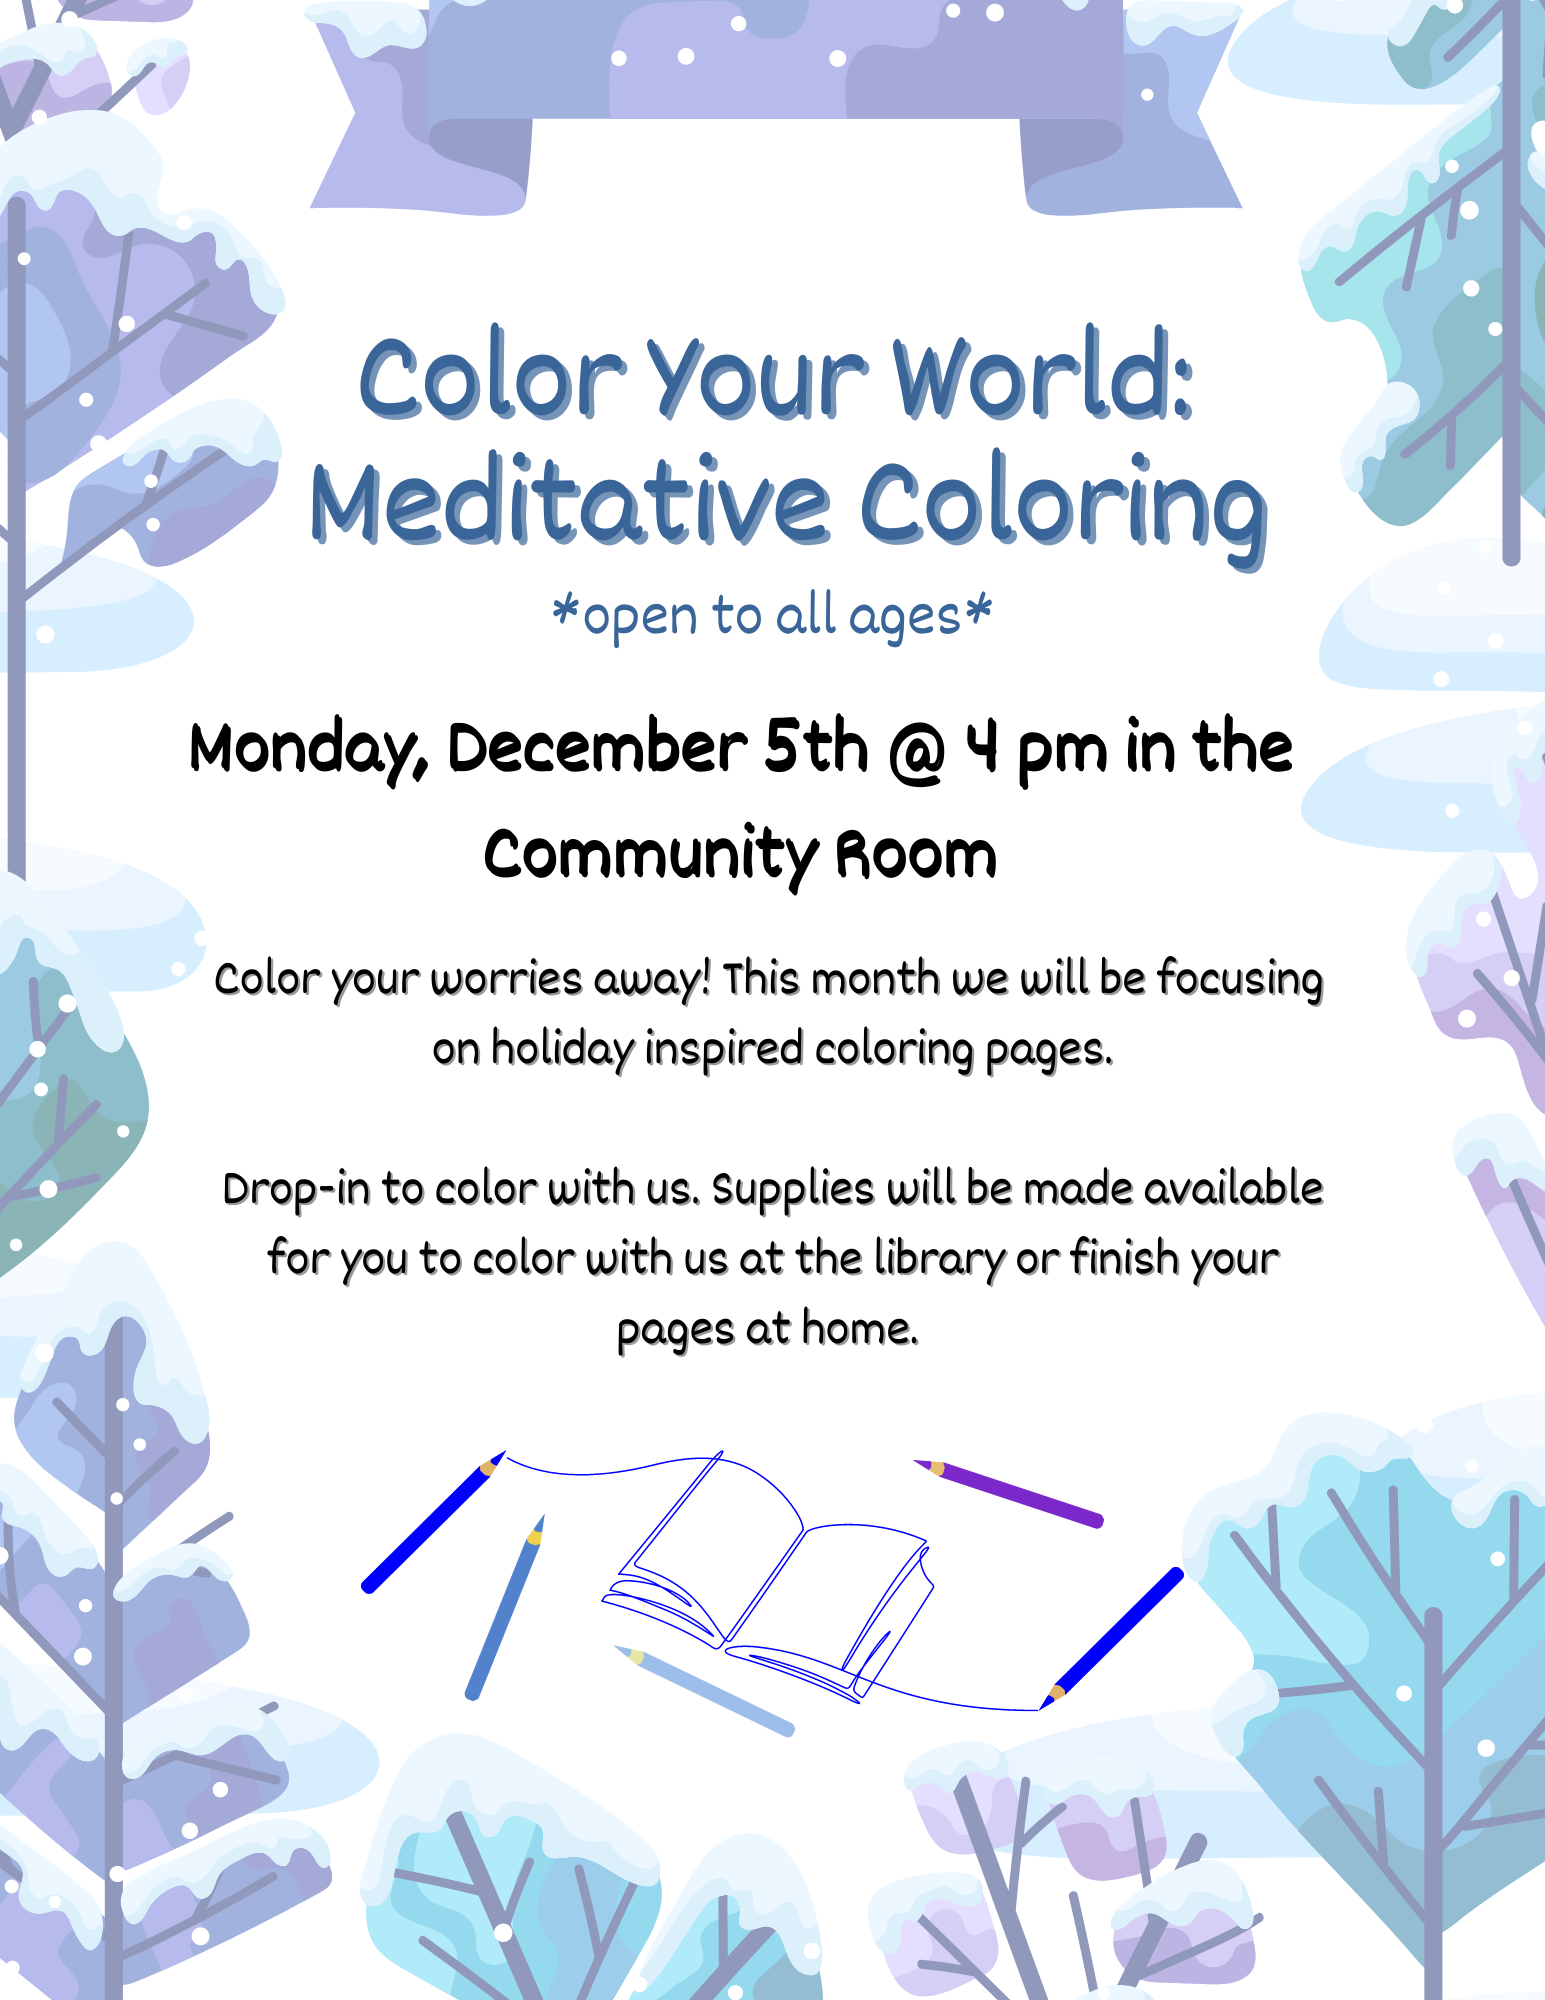 December's Color Your World Meditative Coloring